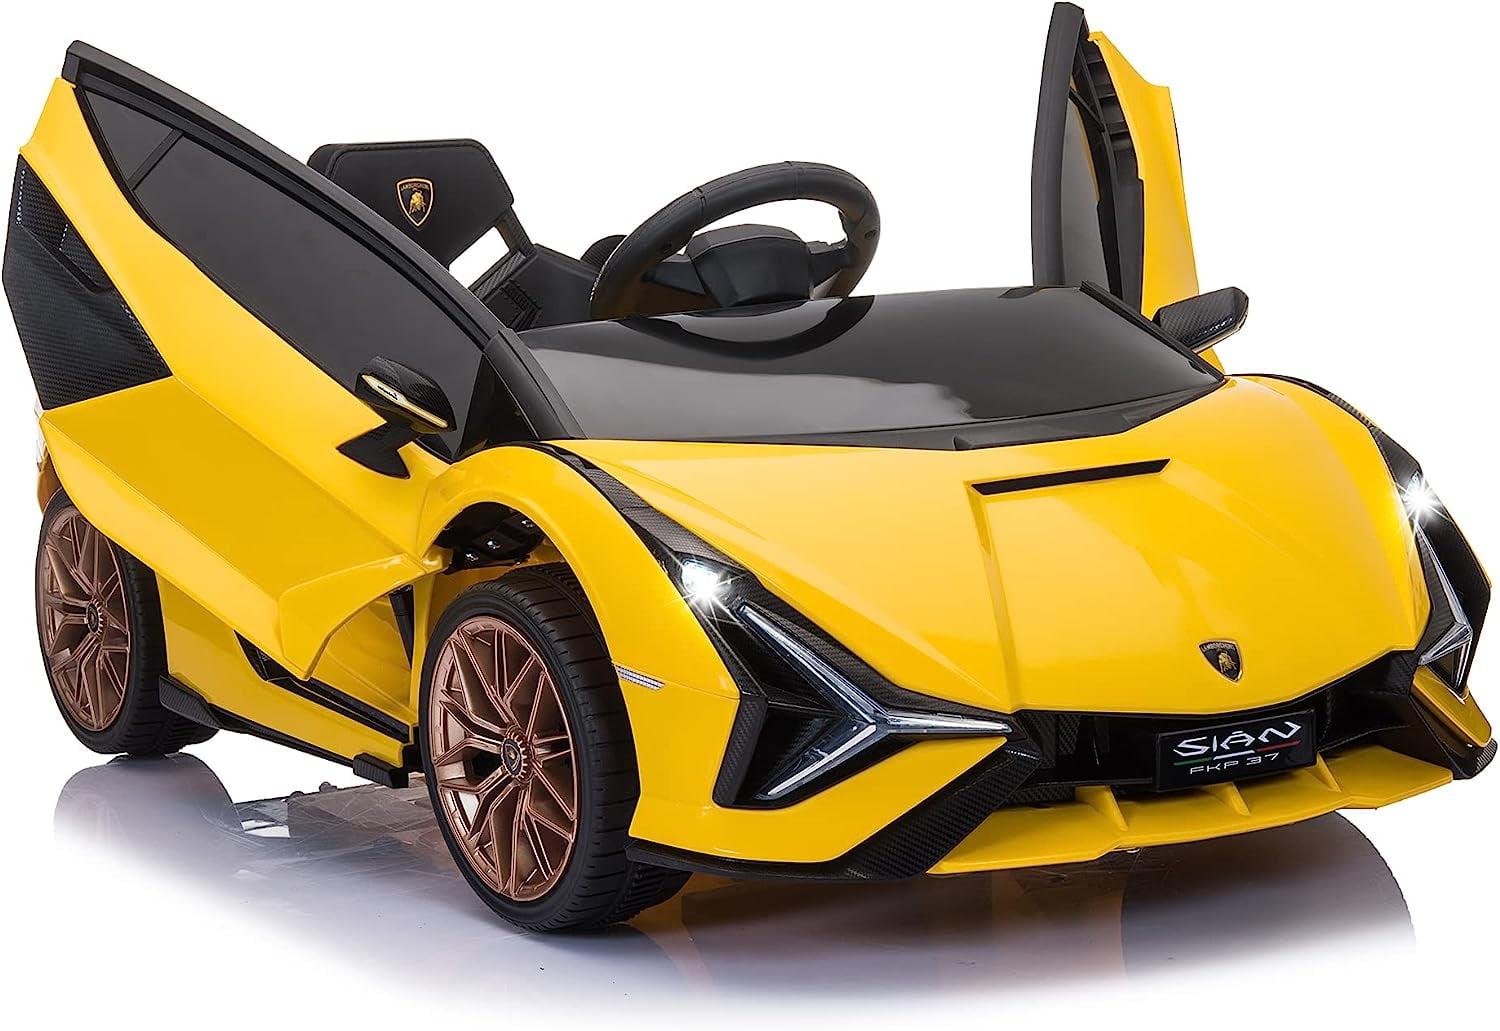 Lamborghini Sian Toy Car Remote Control: Durable and Fun for All Ages